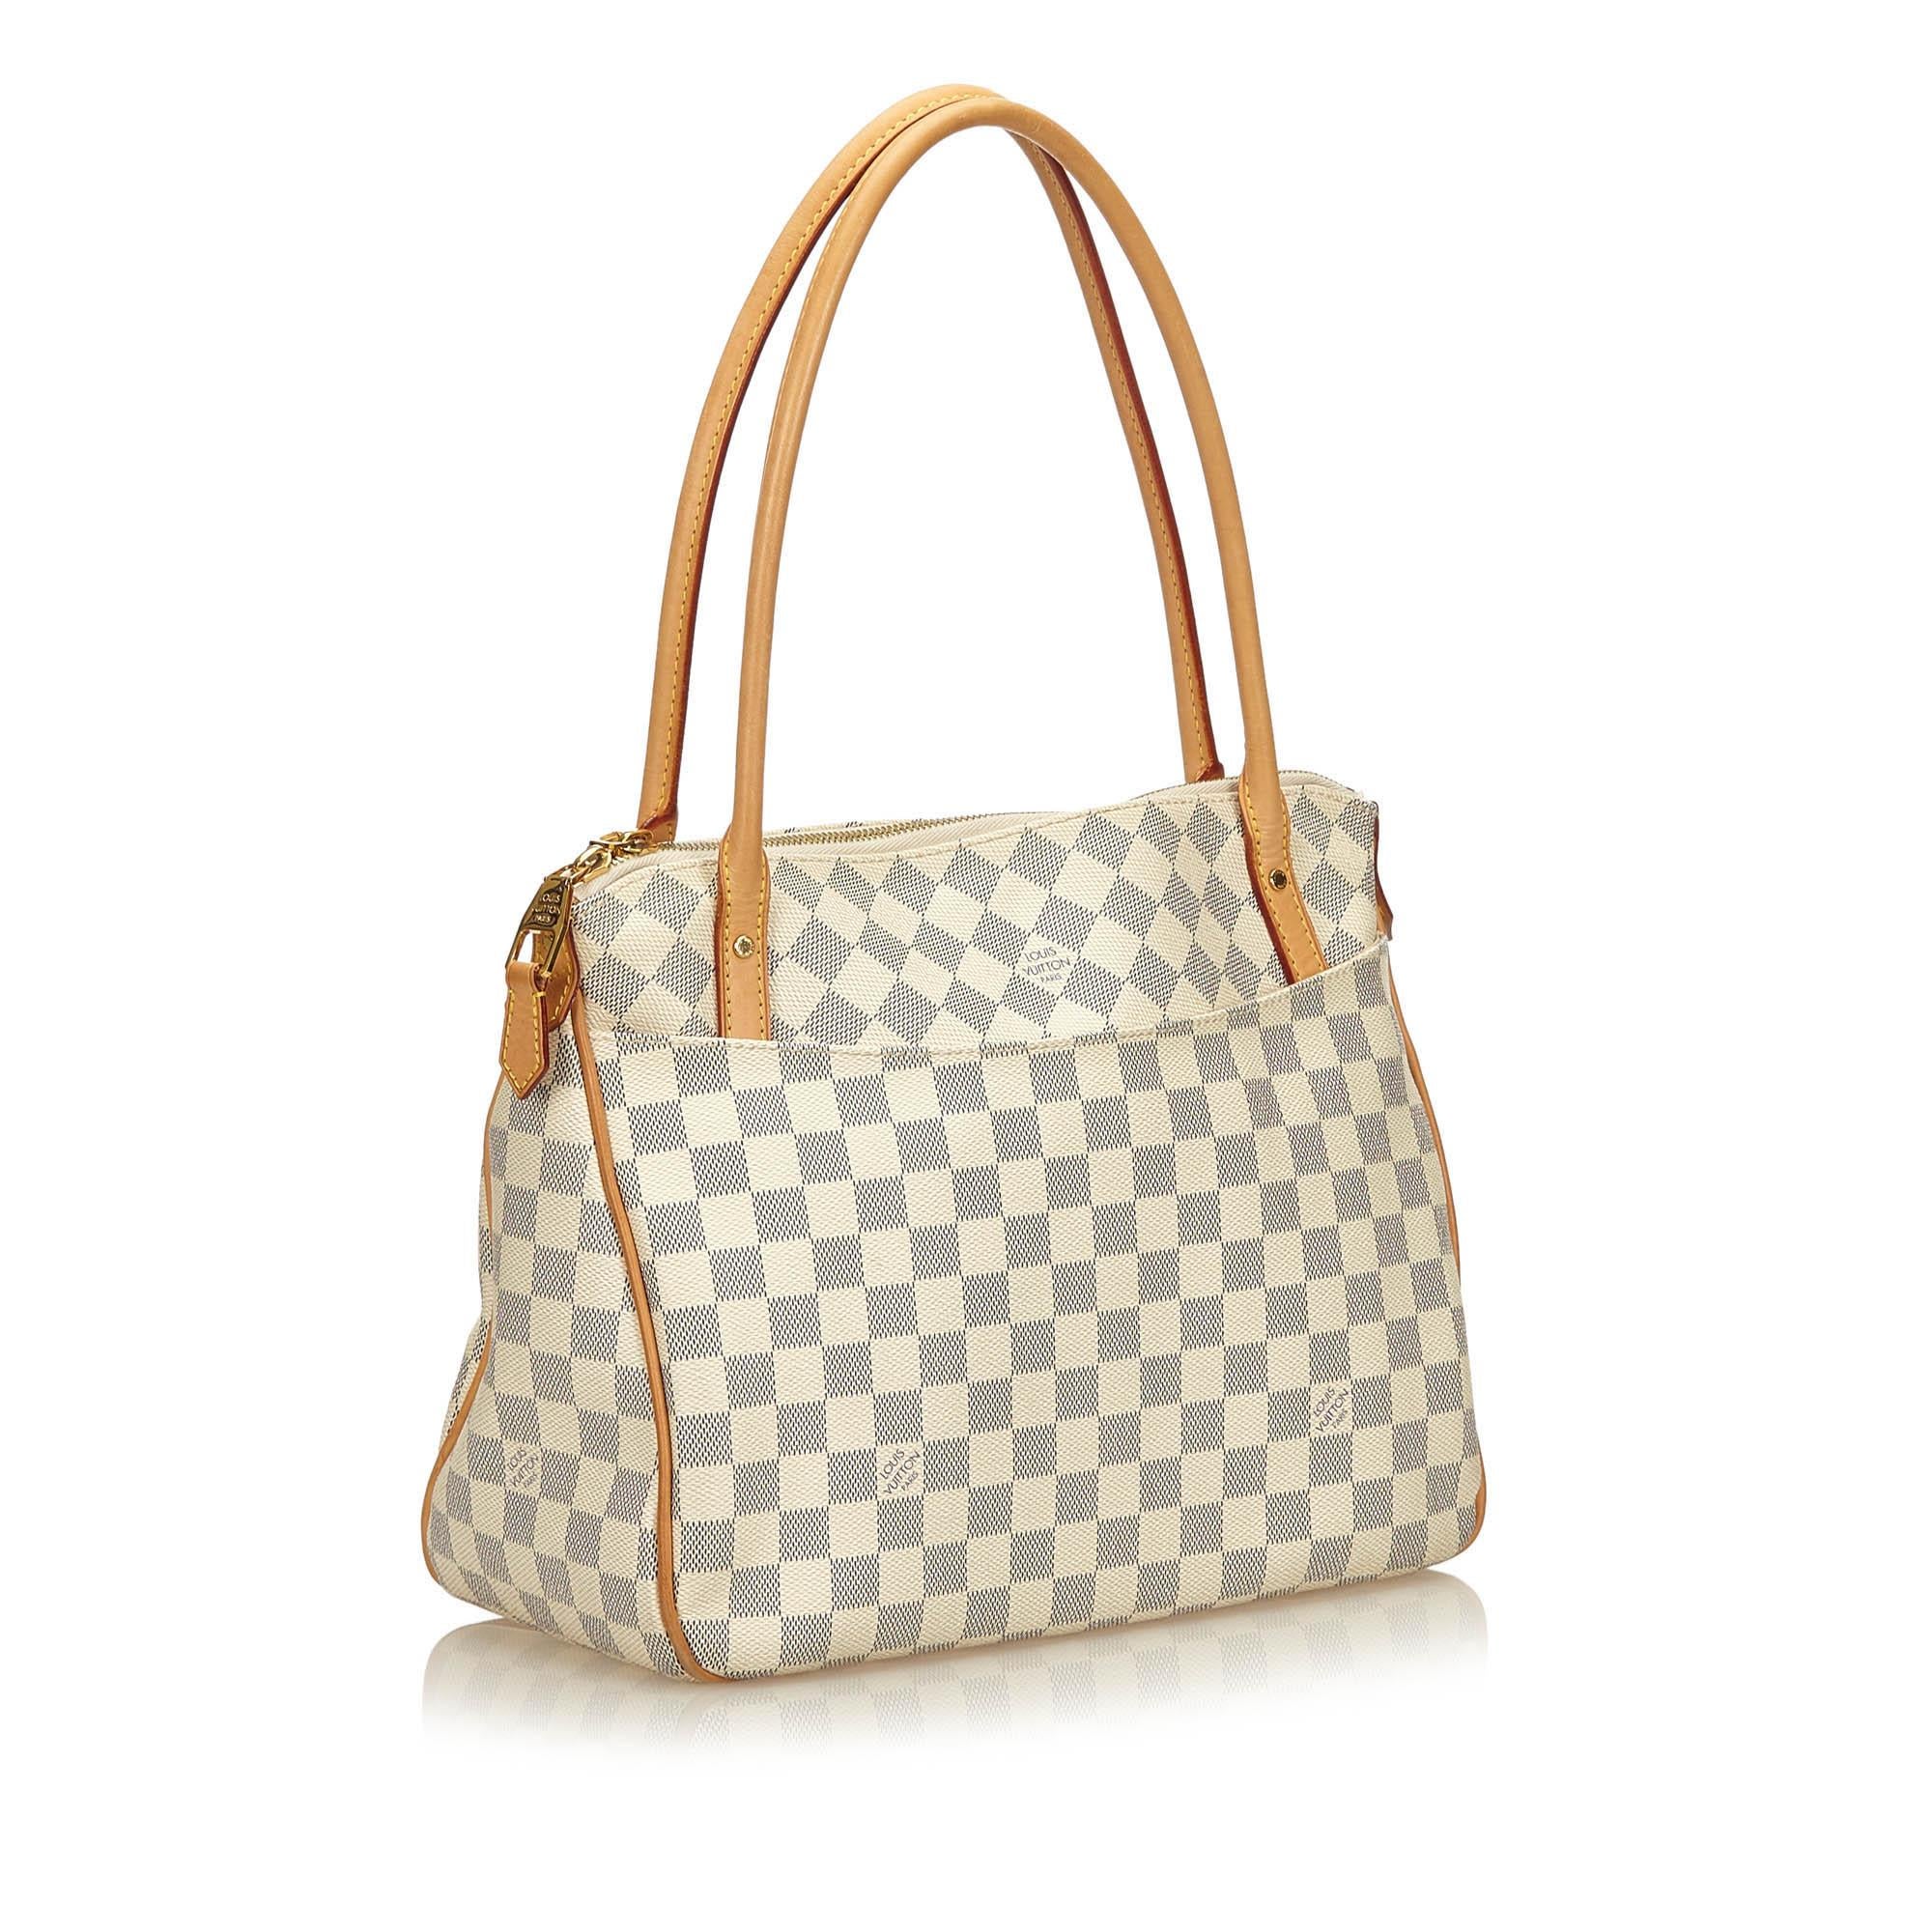 The Figheri PM features a damier azur canvas body, rolled leather handles, top zip closure, and interior pockets.

It carries a AB condition rating.

Dimensions: 
Length 27.00 cm
Width 33.00 cm
Depth 15.00 cm
Shoulder Drop 21.00 cm

Inclusions: No